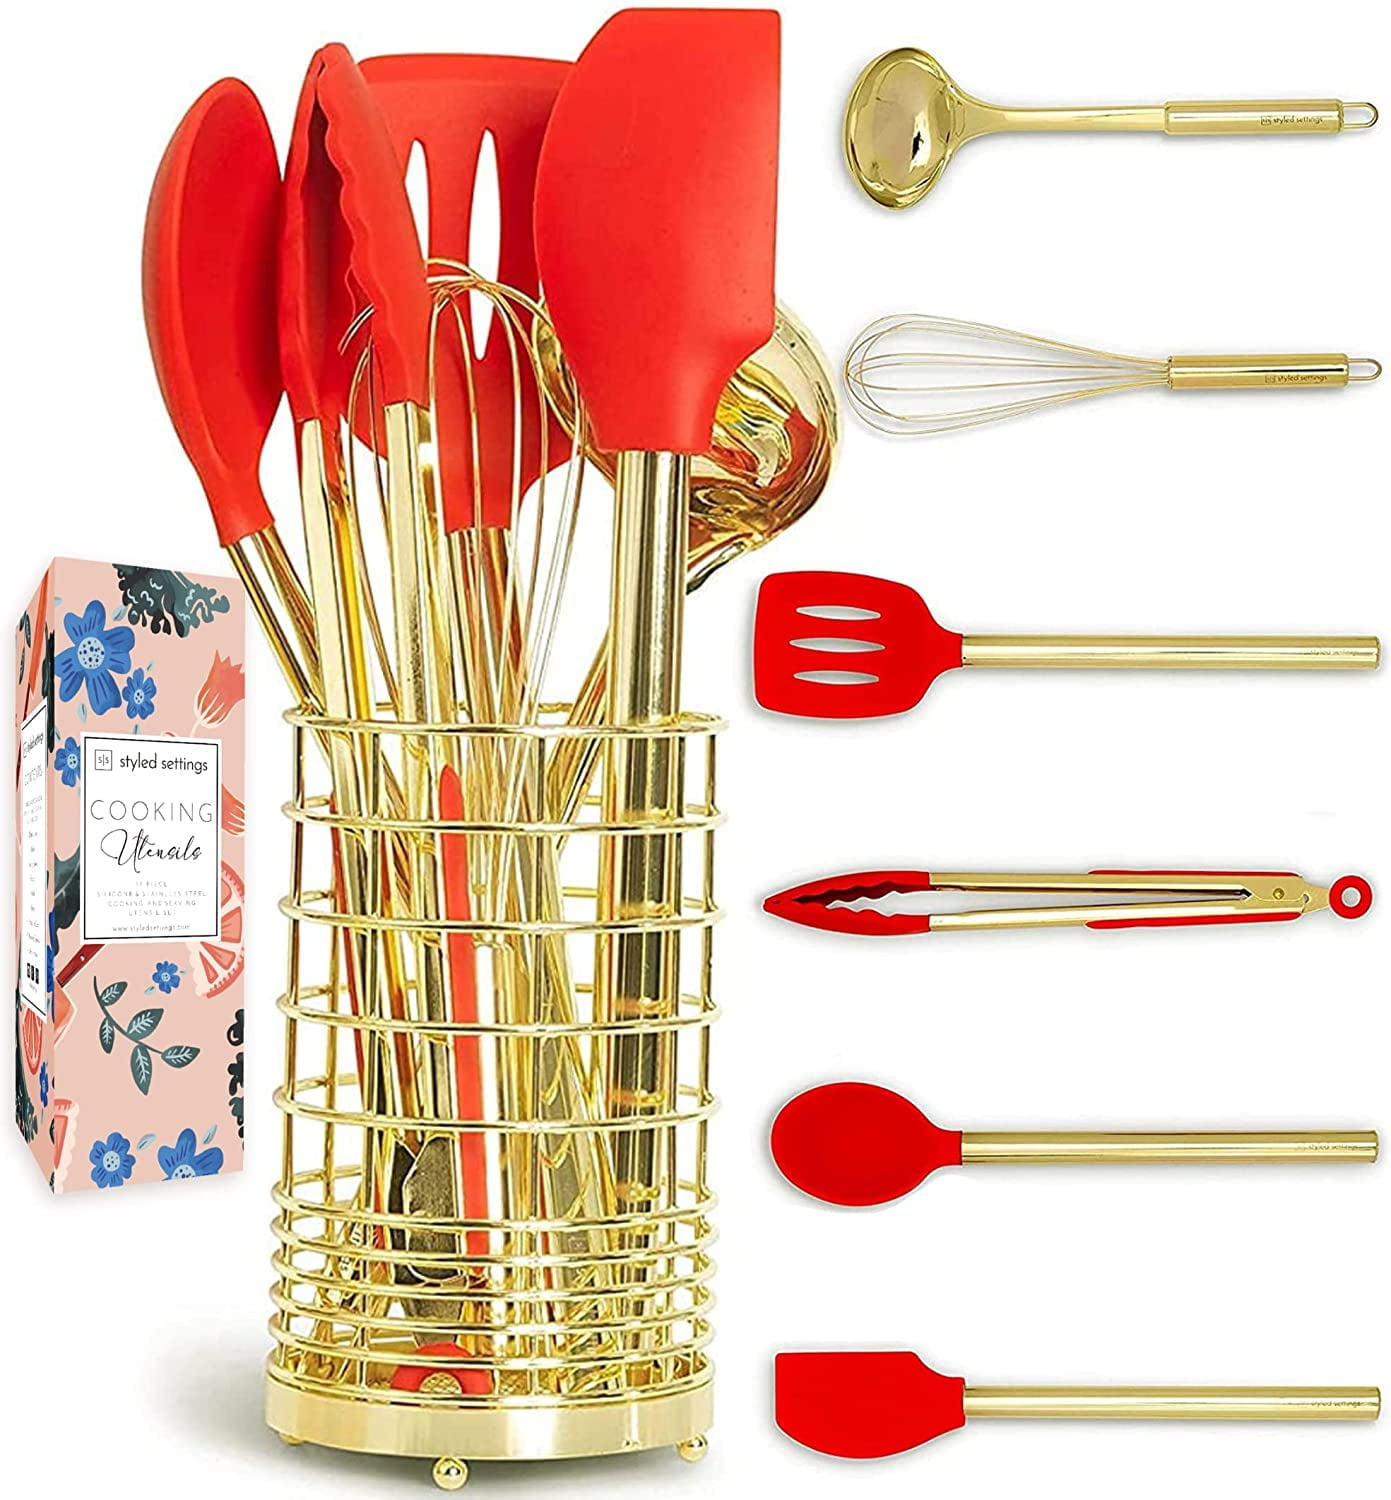  STYLED SETTINGS White Silicone and Gold Kitchen Utensils Set  for Modern Cooking and Serving, Stainless Steel Gold Cooking Utensils and  Gold Serving Utensils- Luxe White and Gold Kitchen Accessories : Health